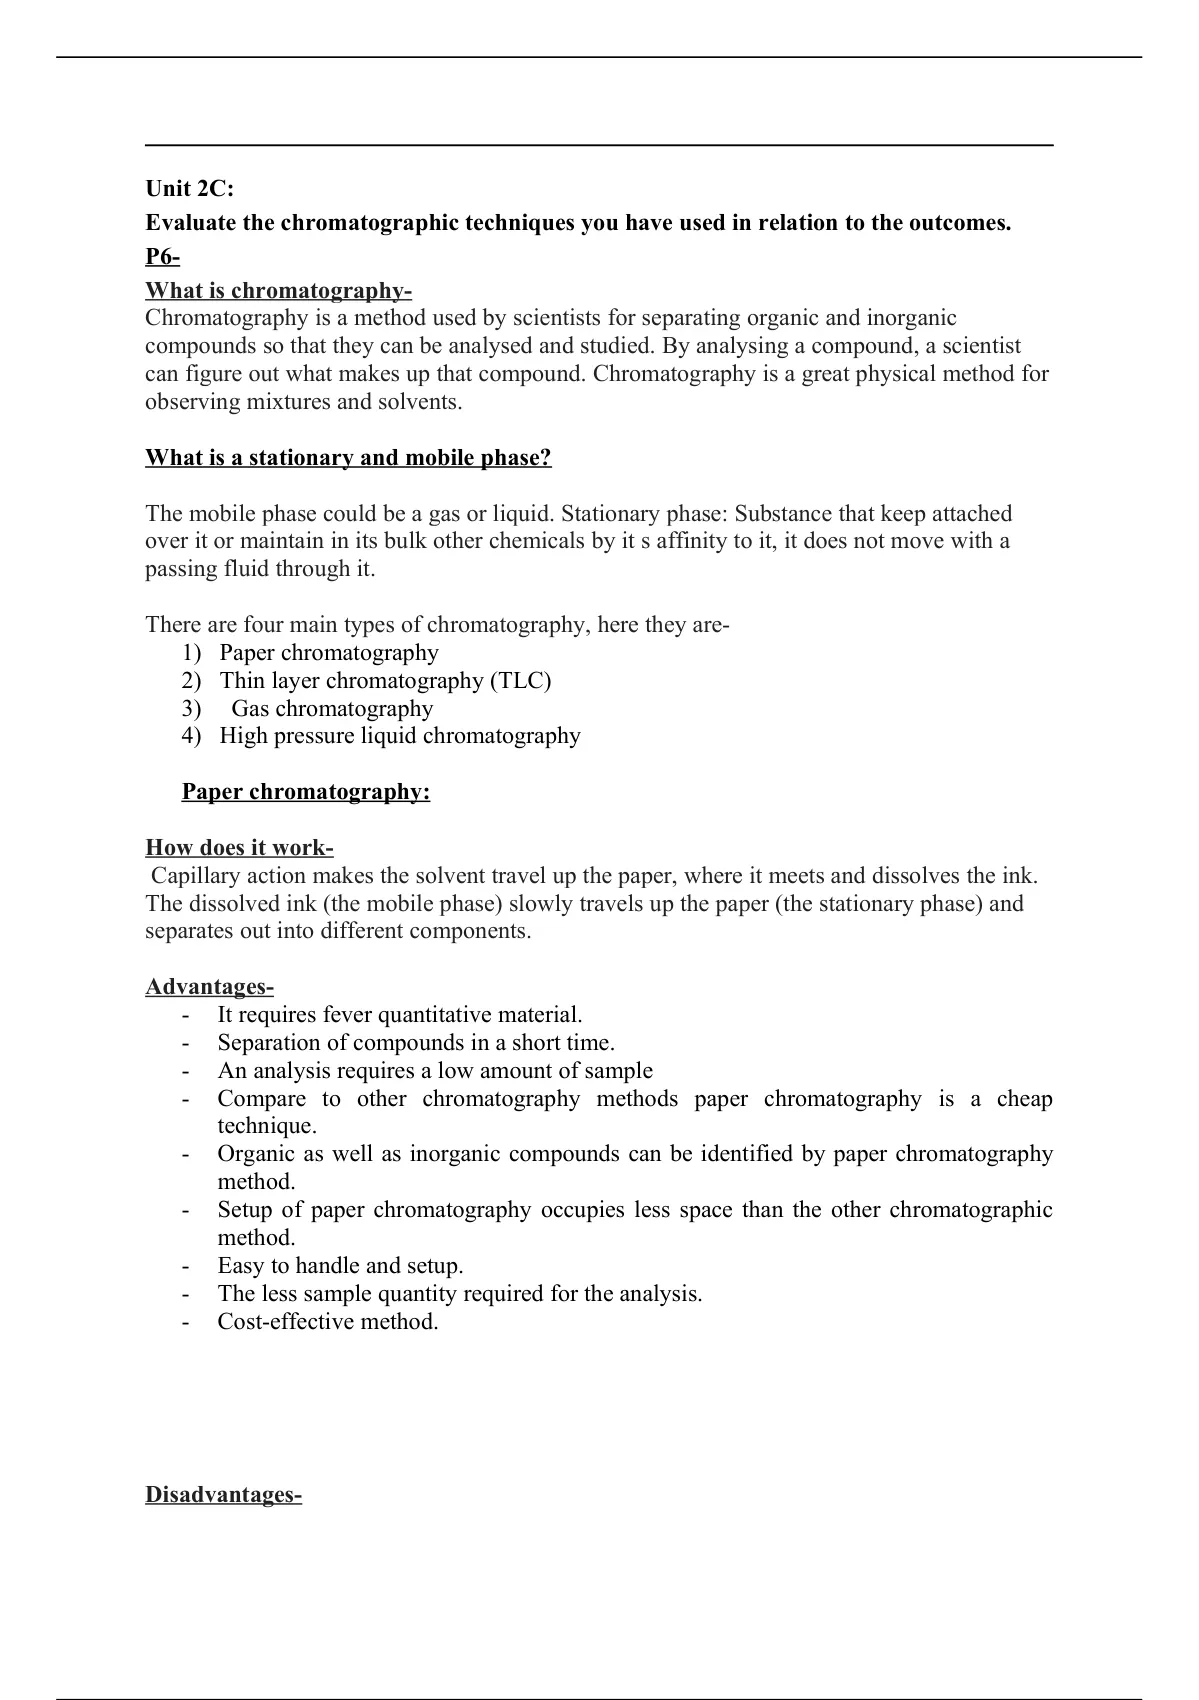 btec applied science chromatography assignment brief